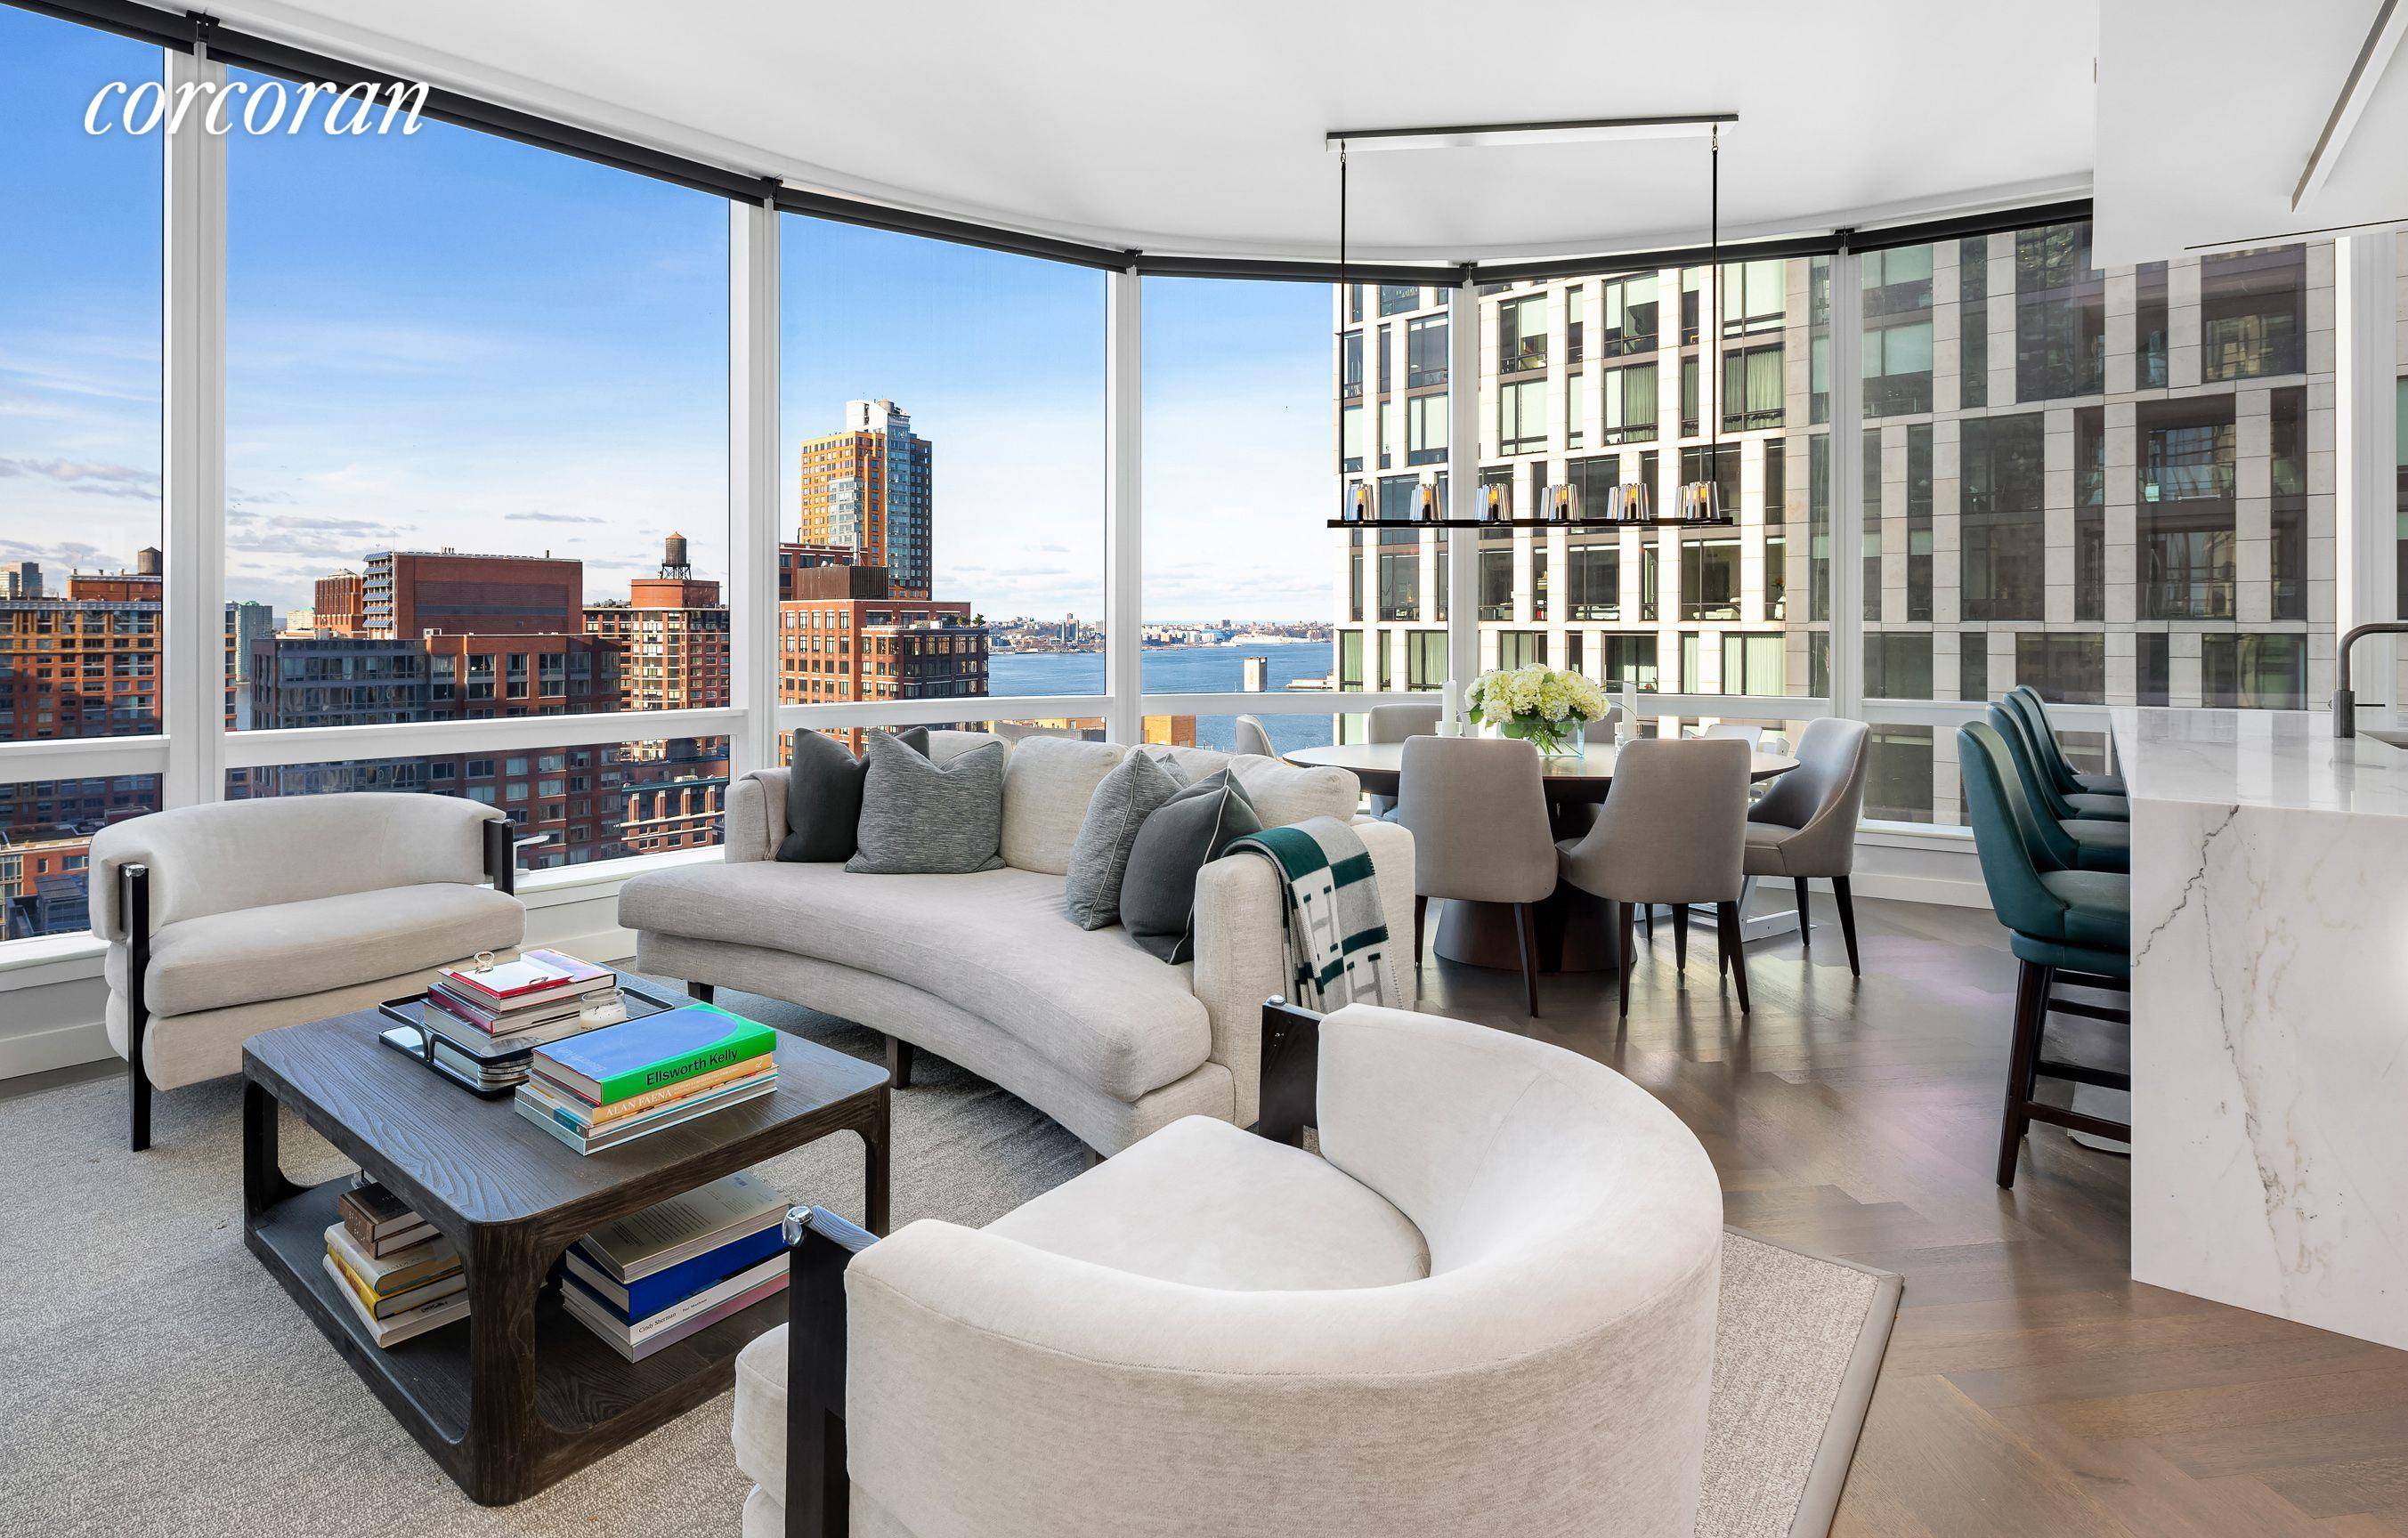 Panaromic Hudson River and city views abound from this fully customized 2, 685 square foot home at world renowned 111 Murray Street.